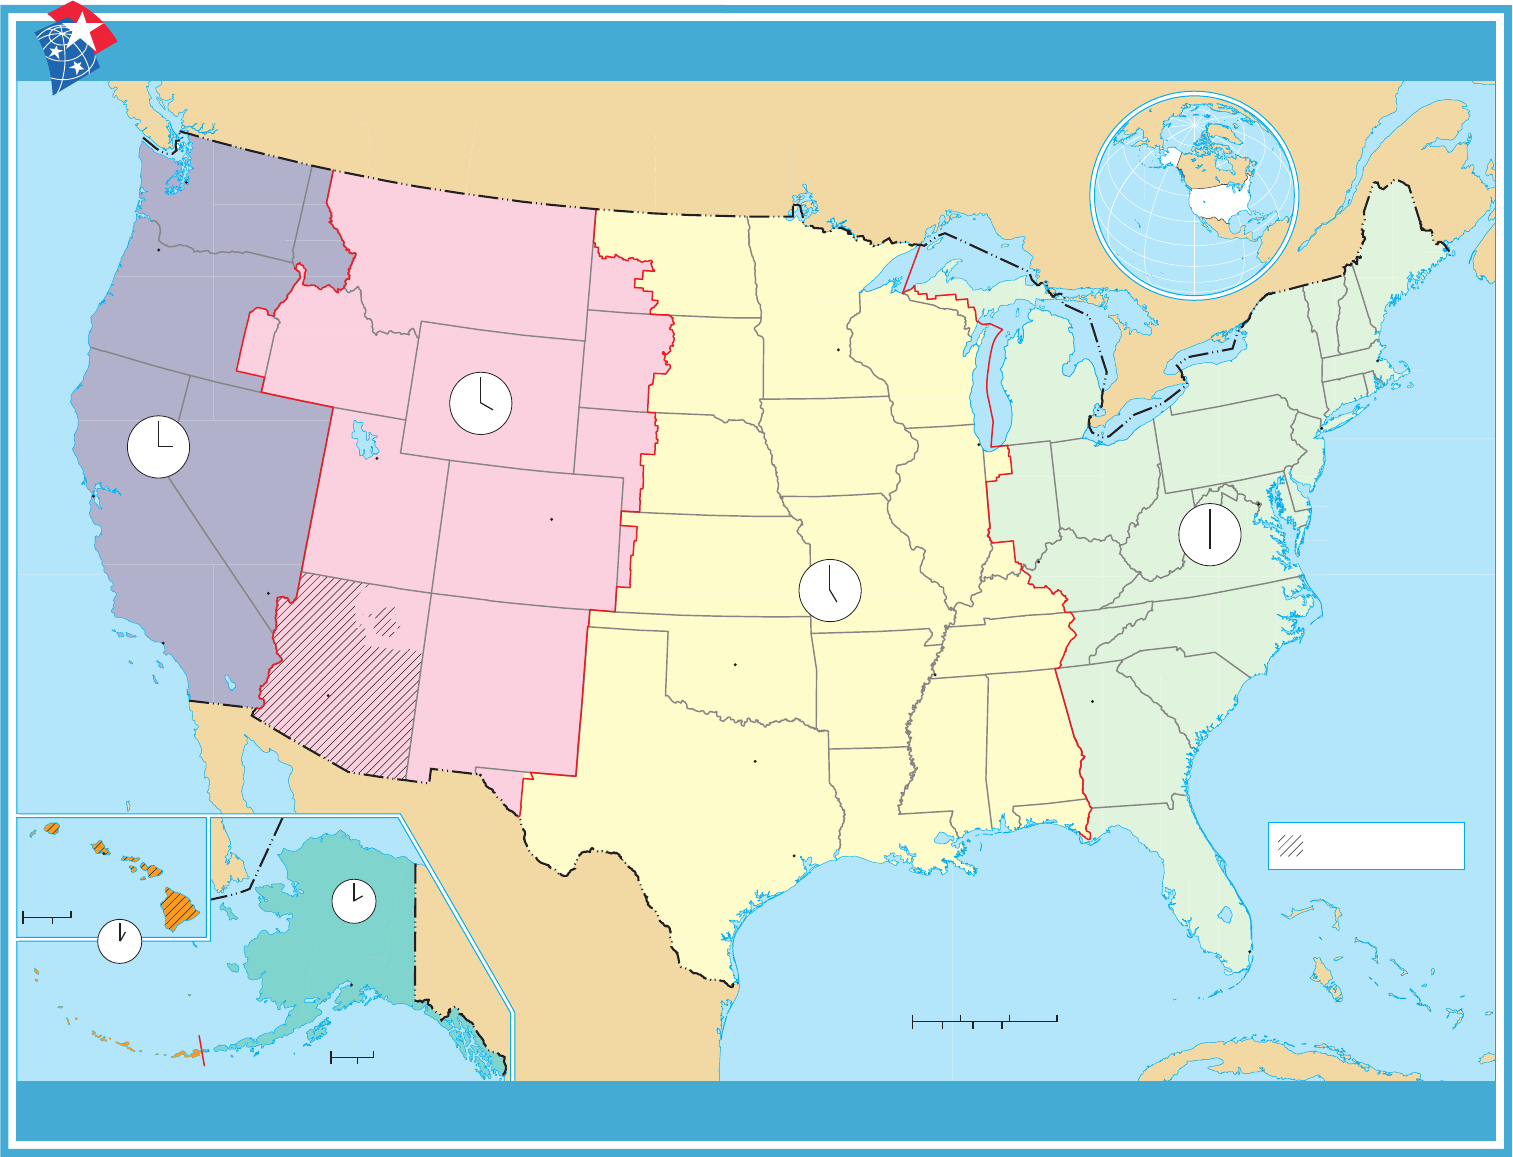 US Standard Time Zones